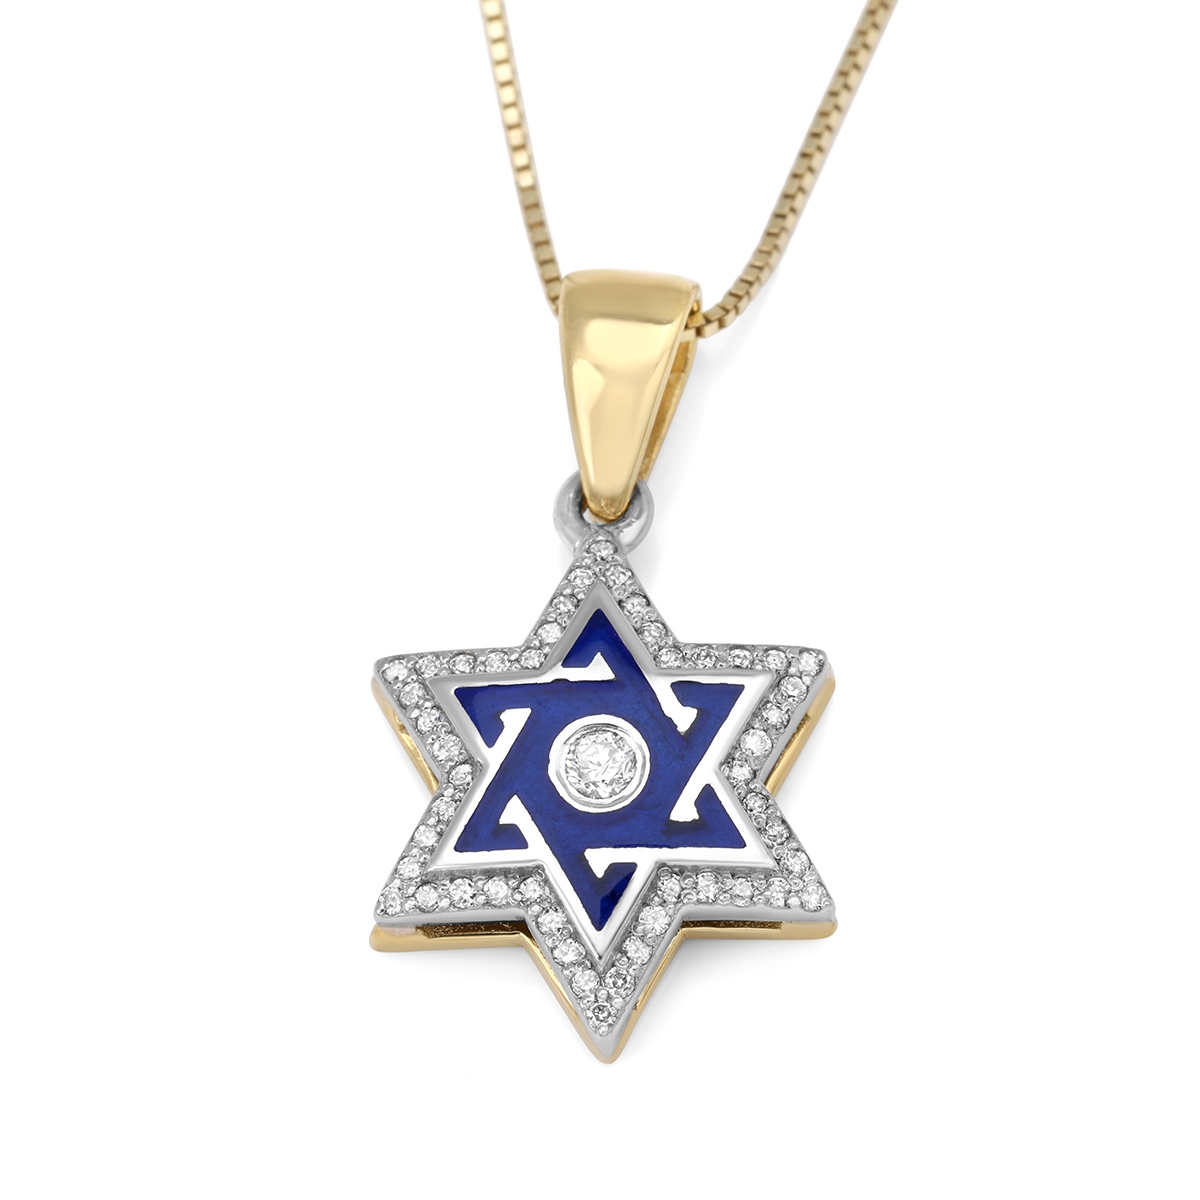 Deluxe Diamond-Accented 14K Gold Star of David Necklace With Blue Enamel - 1